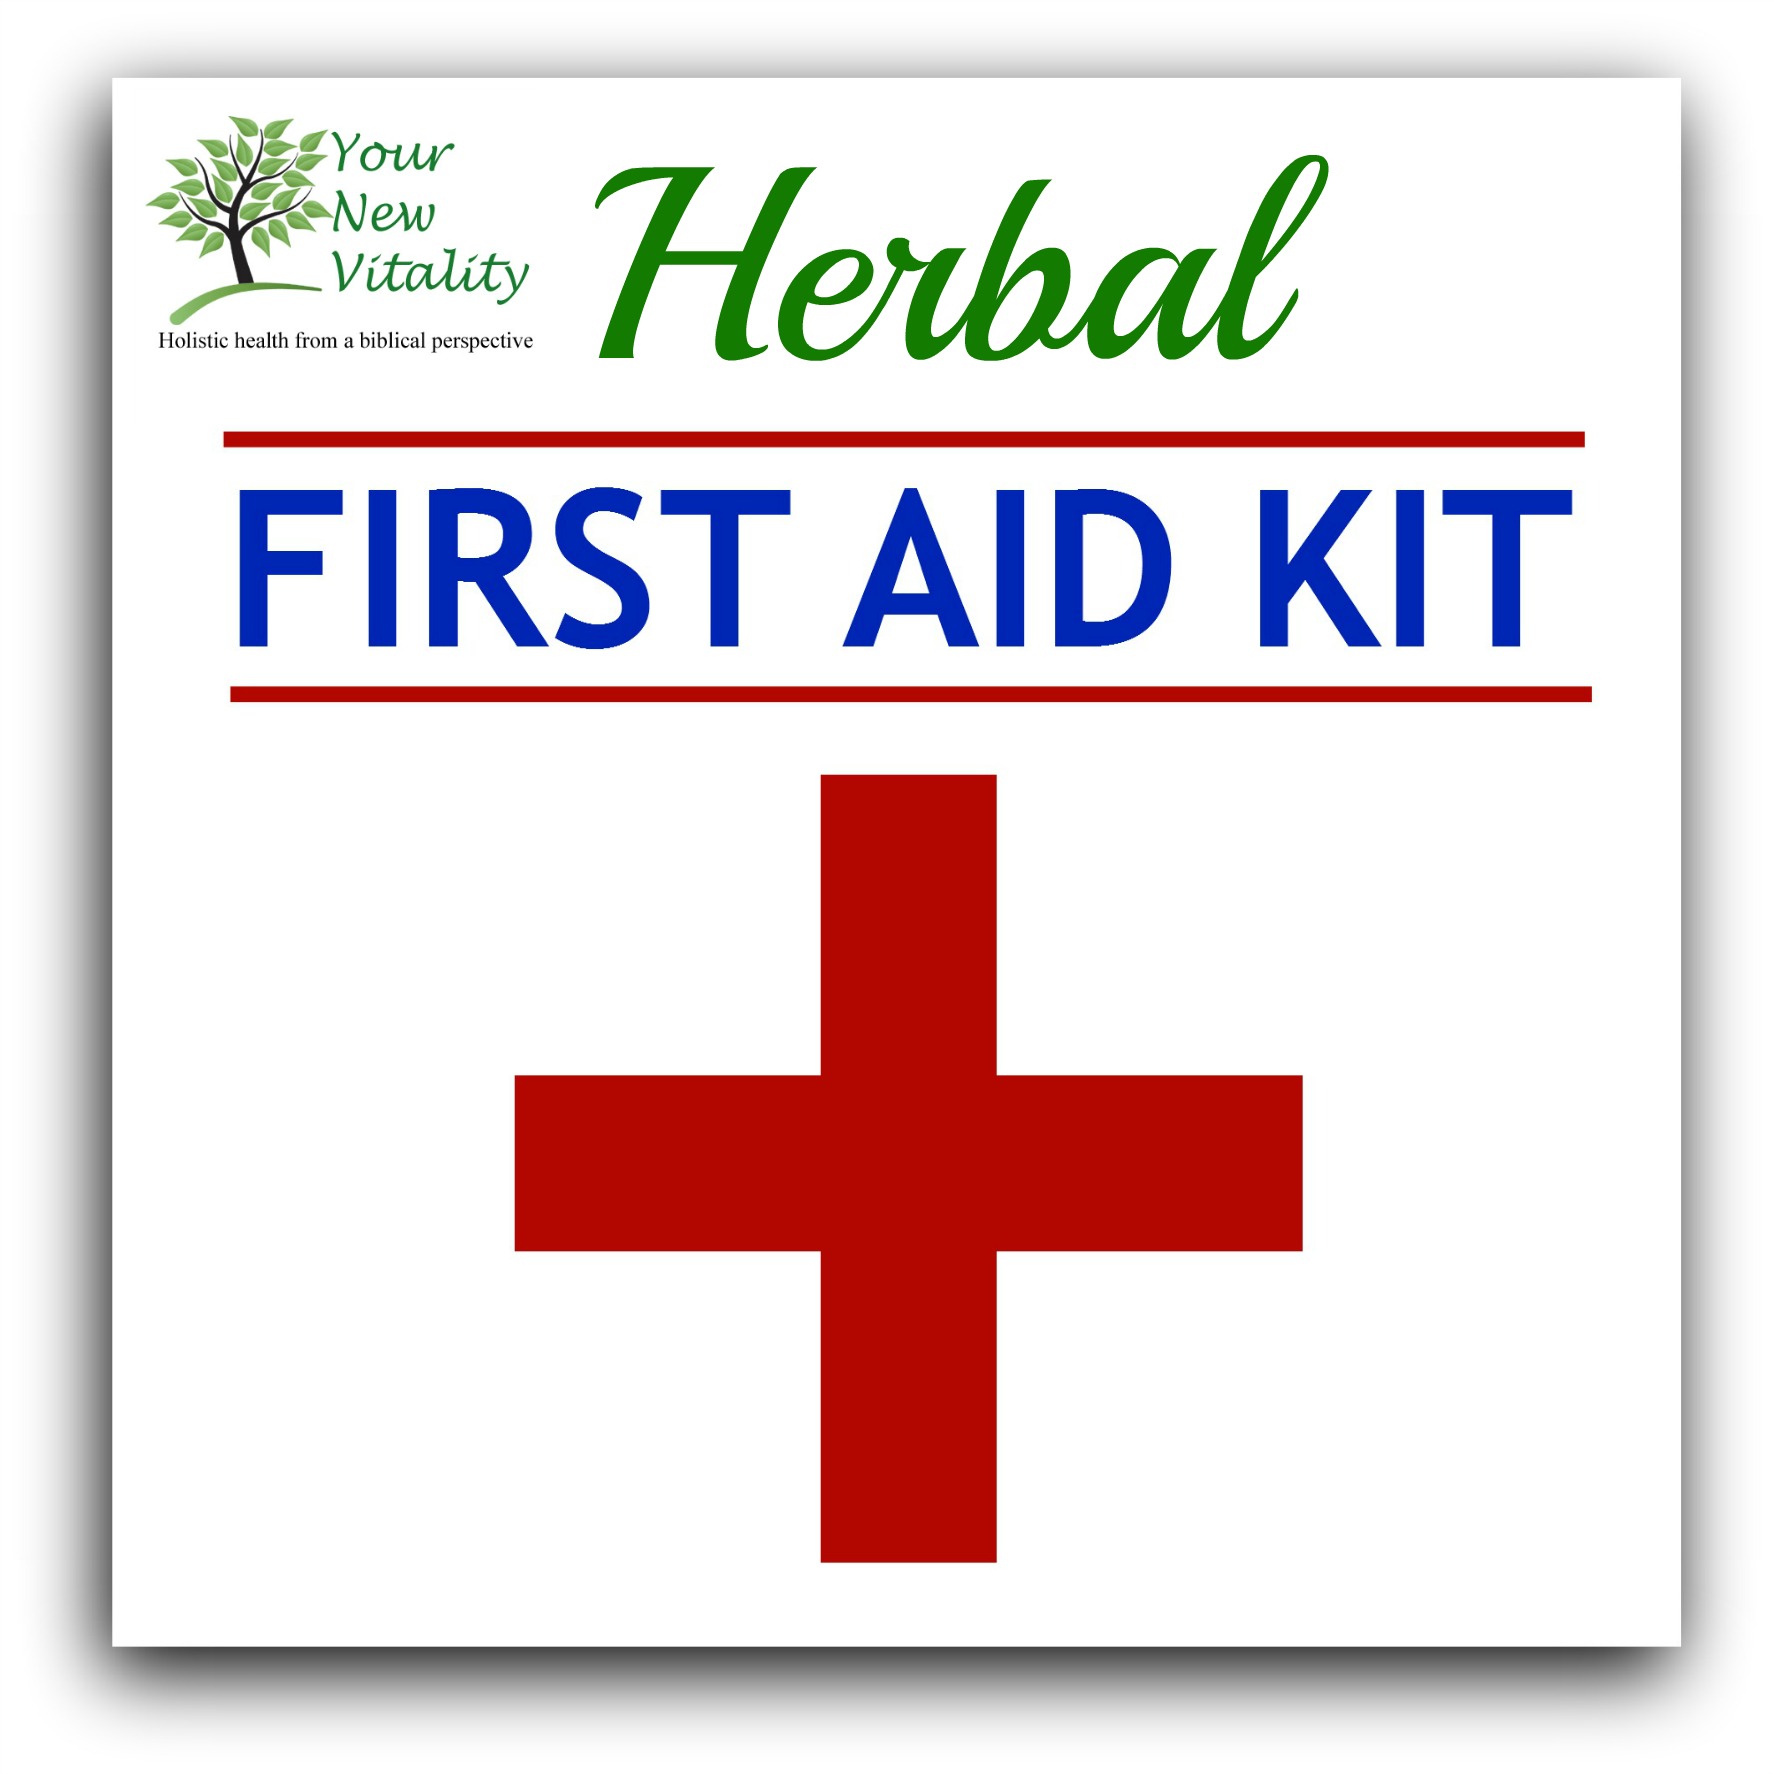 FIRST AID KIT JULIE made on picmonkey2